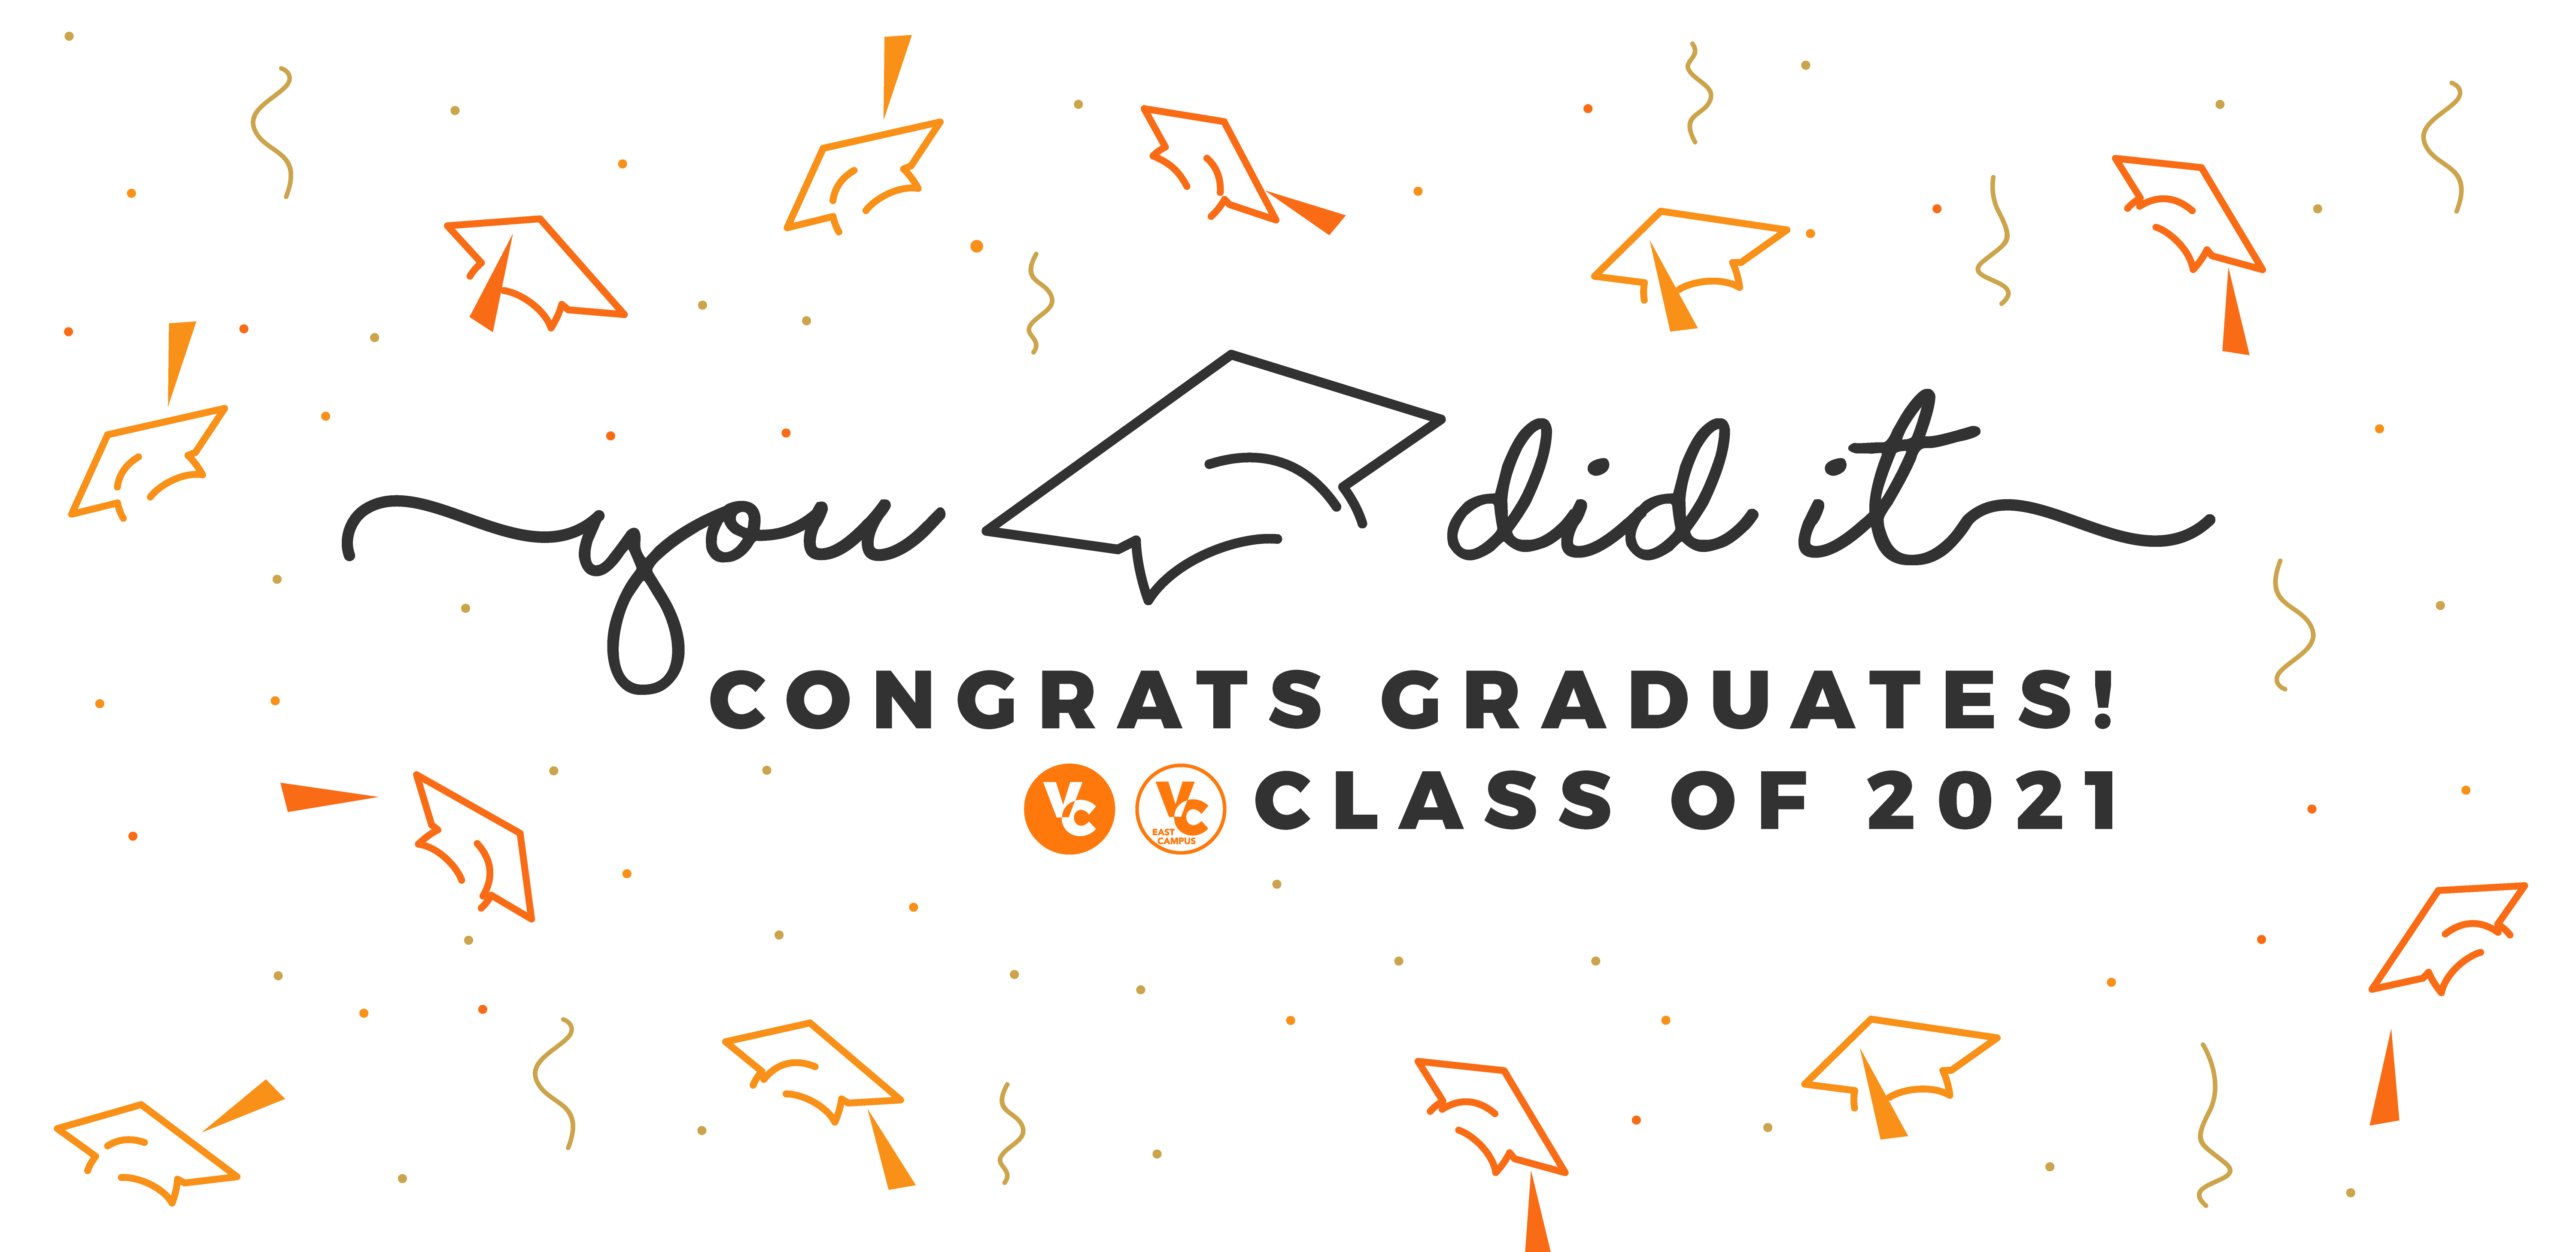 Decorative banner with text that reads: You Did It. Congrats Graduates! Class of 2021.